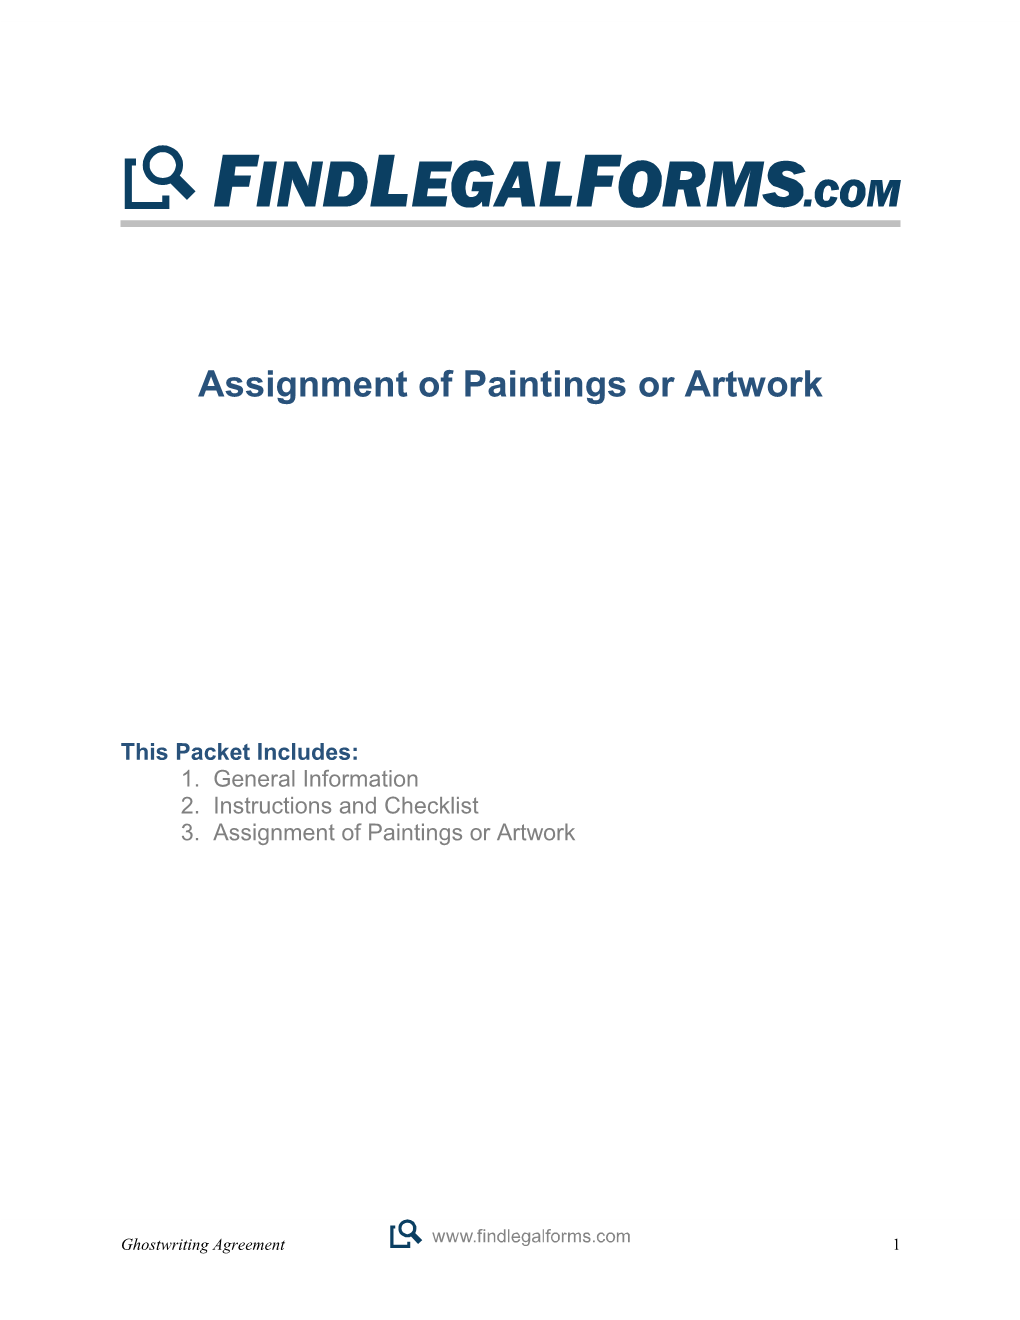 Assignment of Paintings Or Artwork